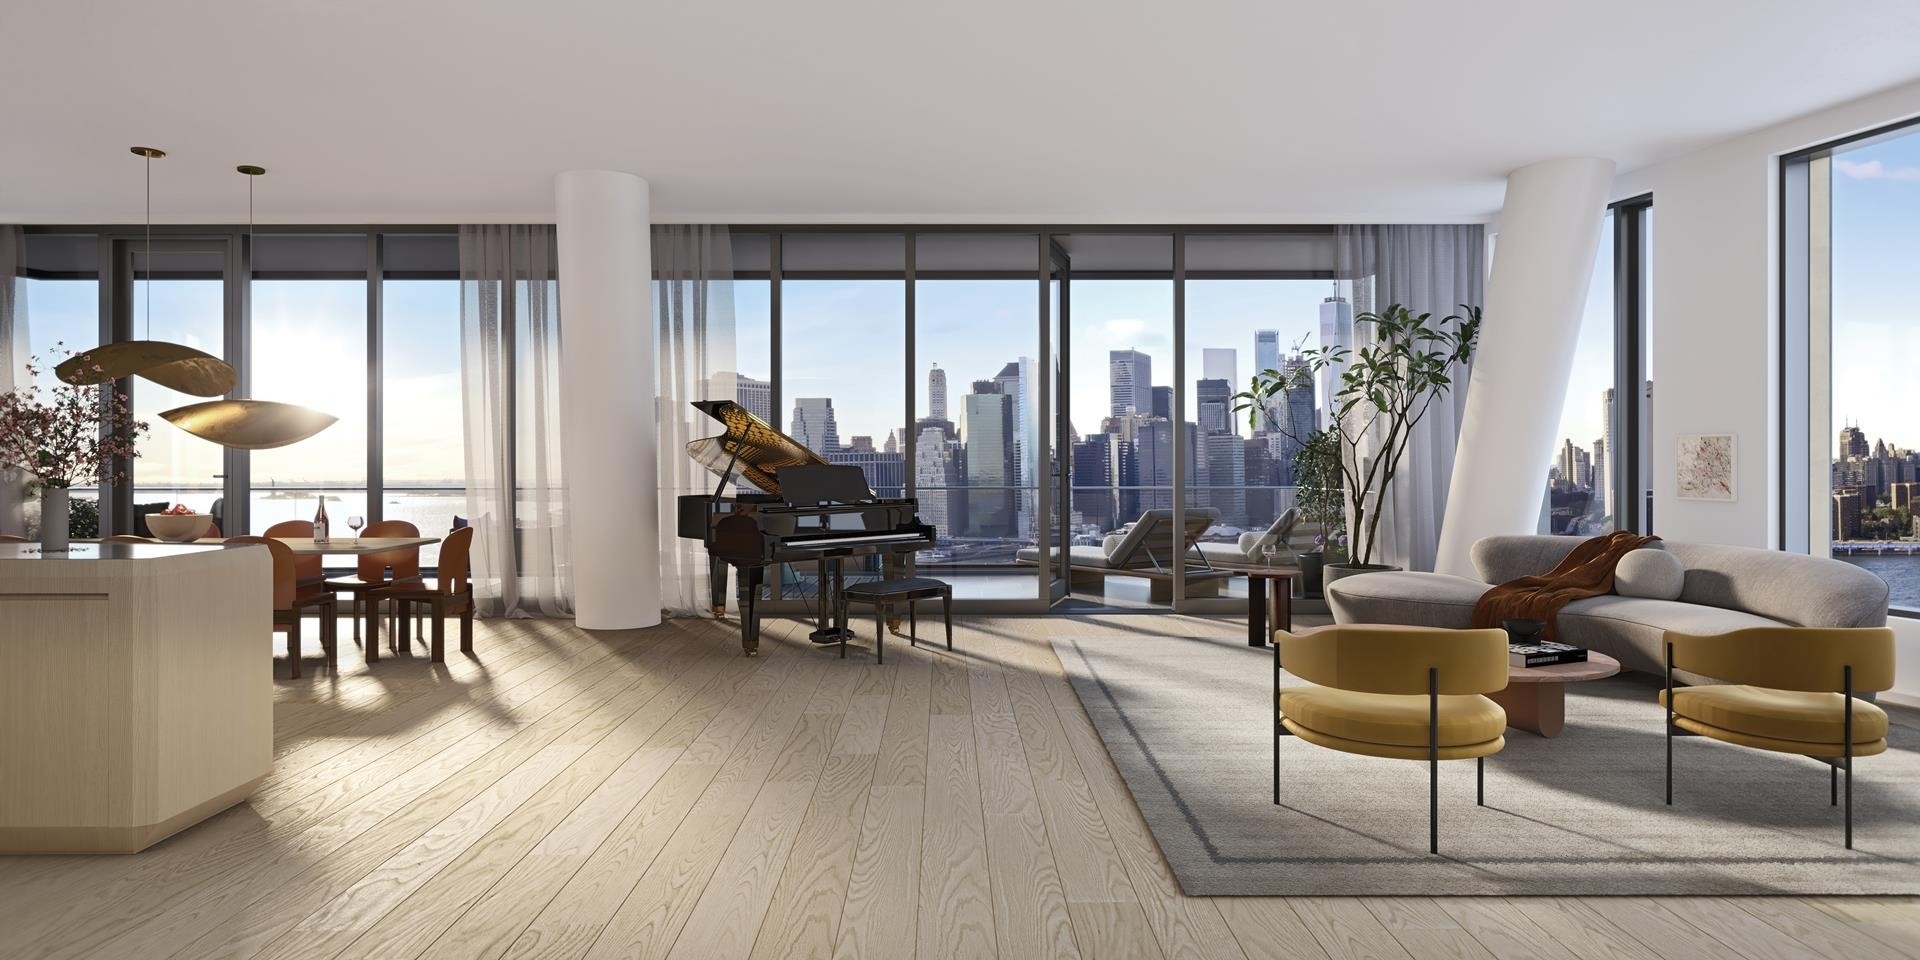 Condominium for Sale at Olympia Dumbo, 30 FRONT ST, 24A Brooklyn, NY 11201